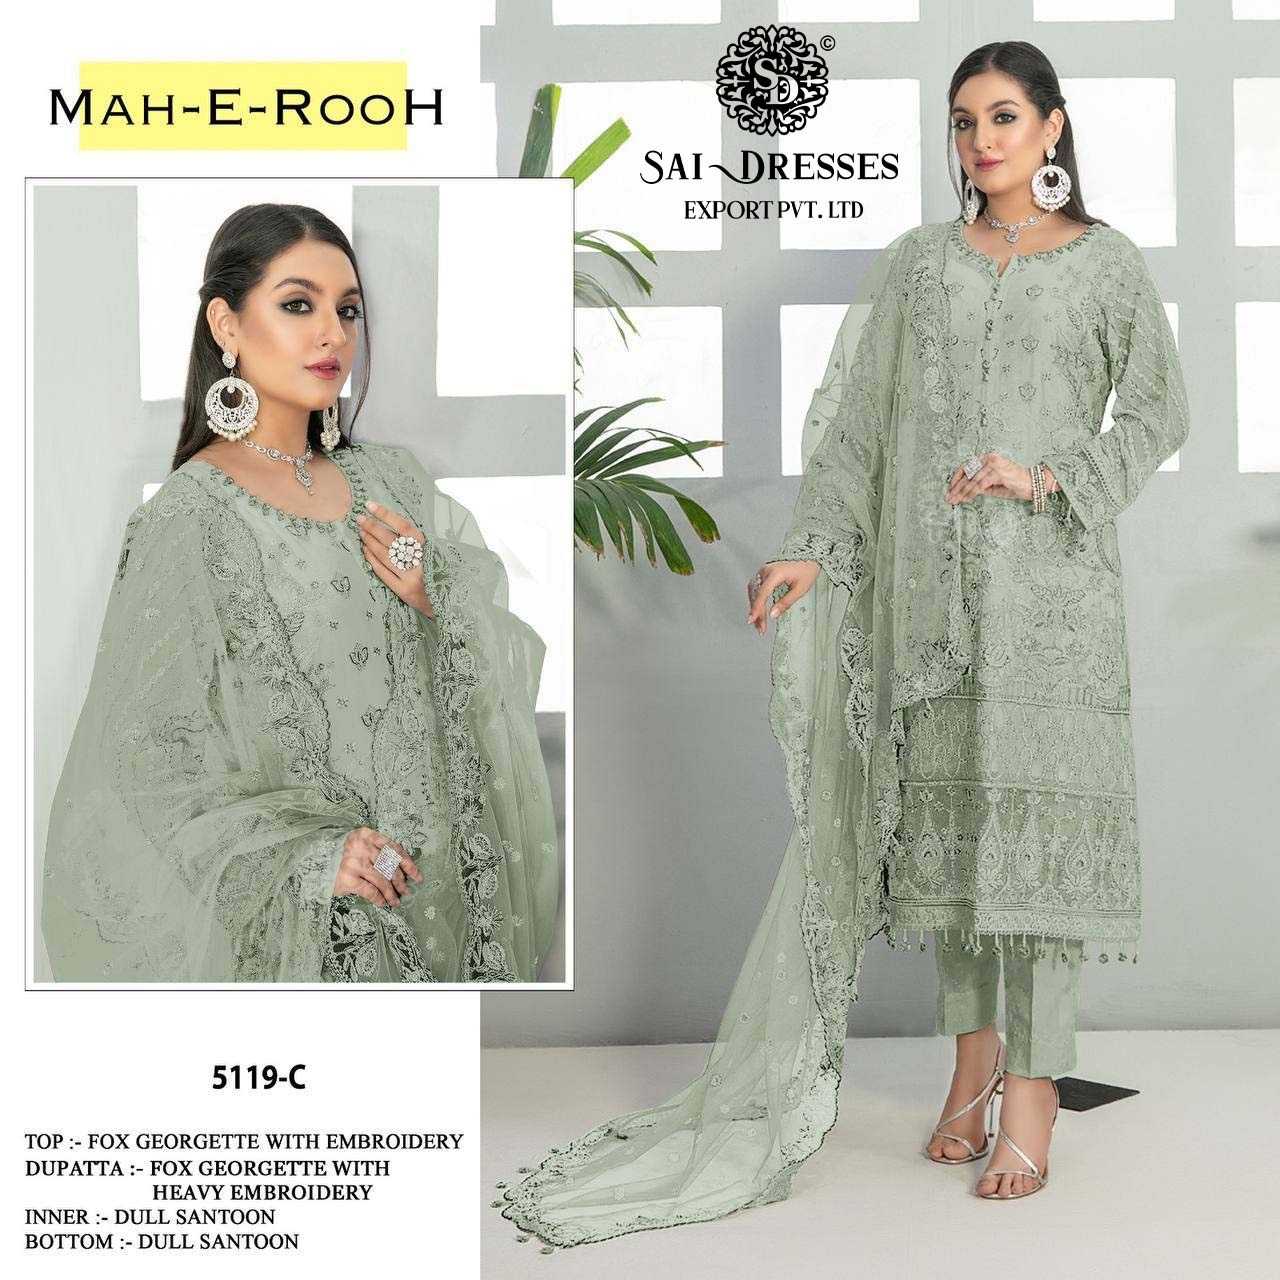 MAH-E-ROOH 5119-A NX PAKISTANI DRESS MATERIAL IN WHOLESALE RATE IN SURAT 